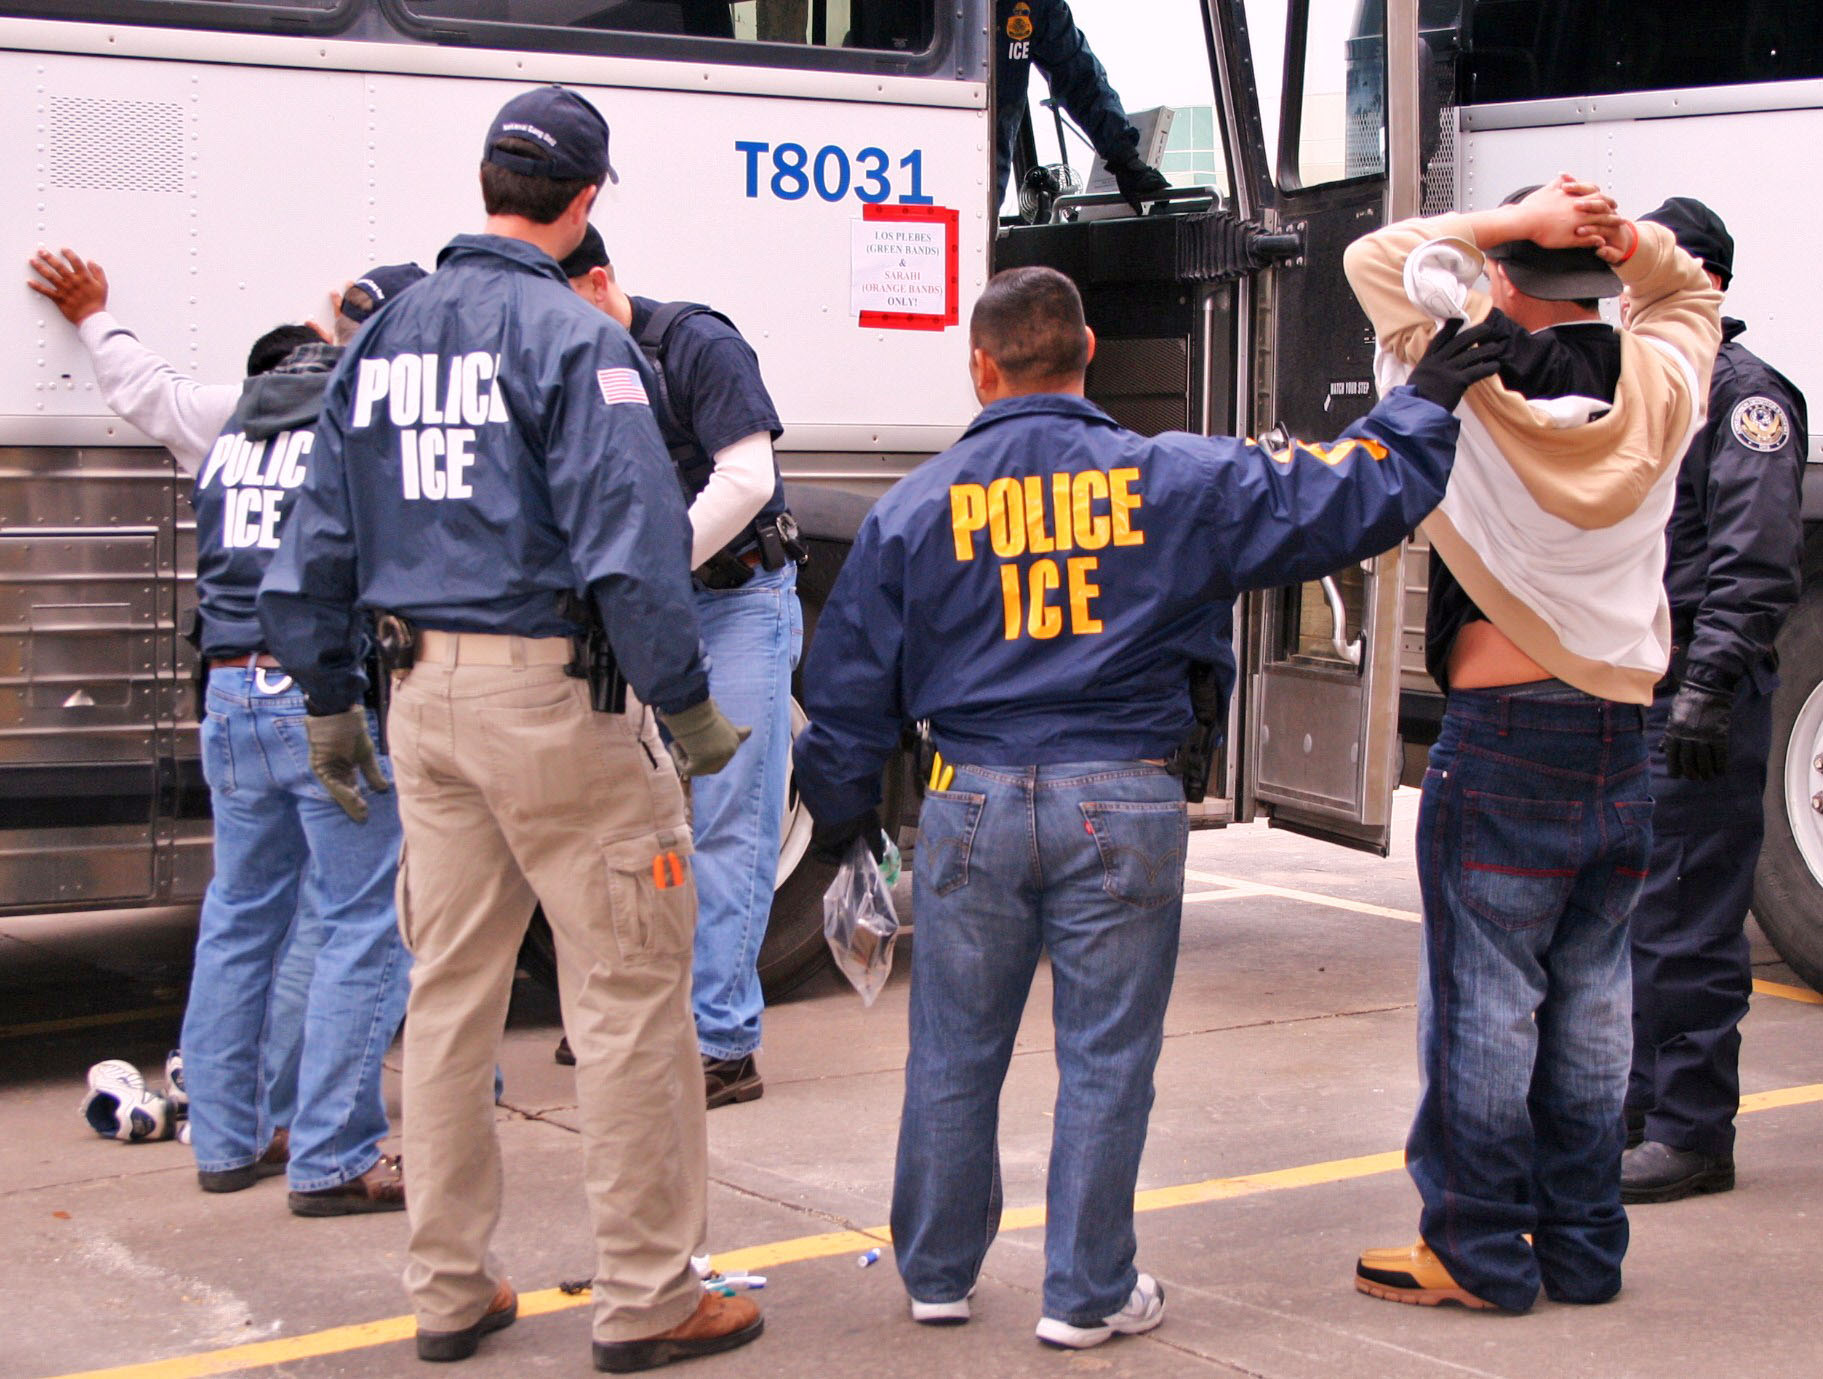 Feds conduct raids on illegal immigrants nationwide, including sanctuary cities